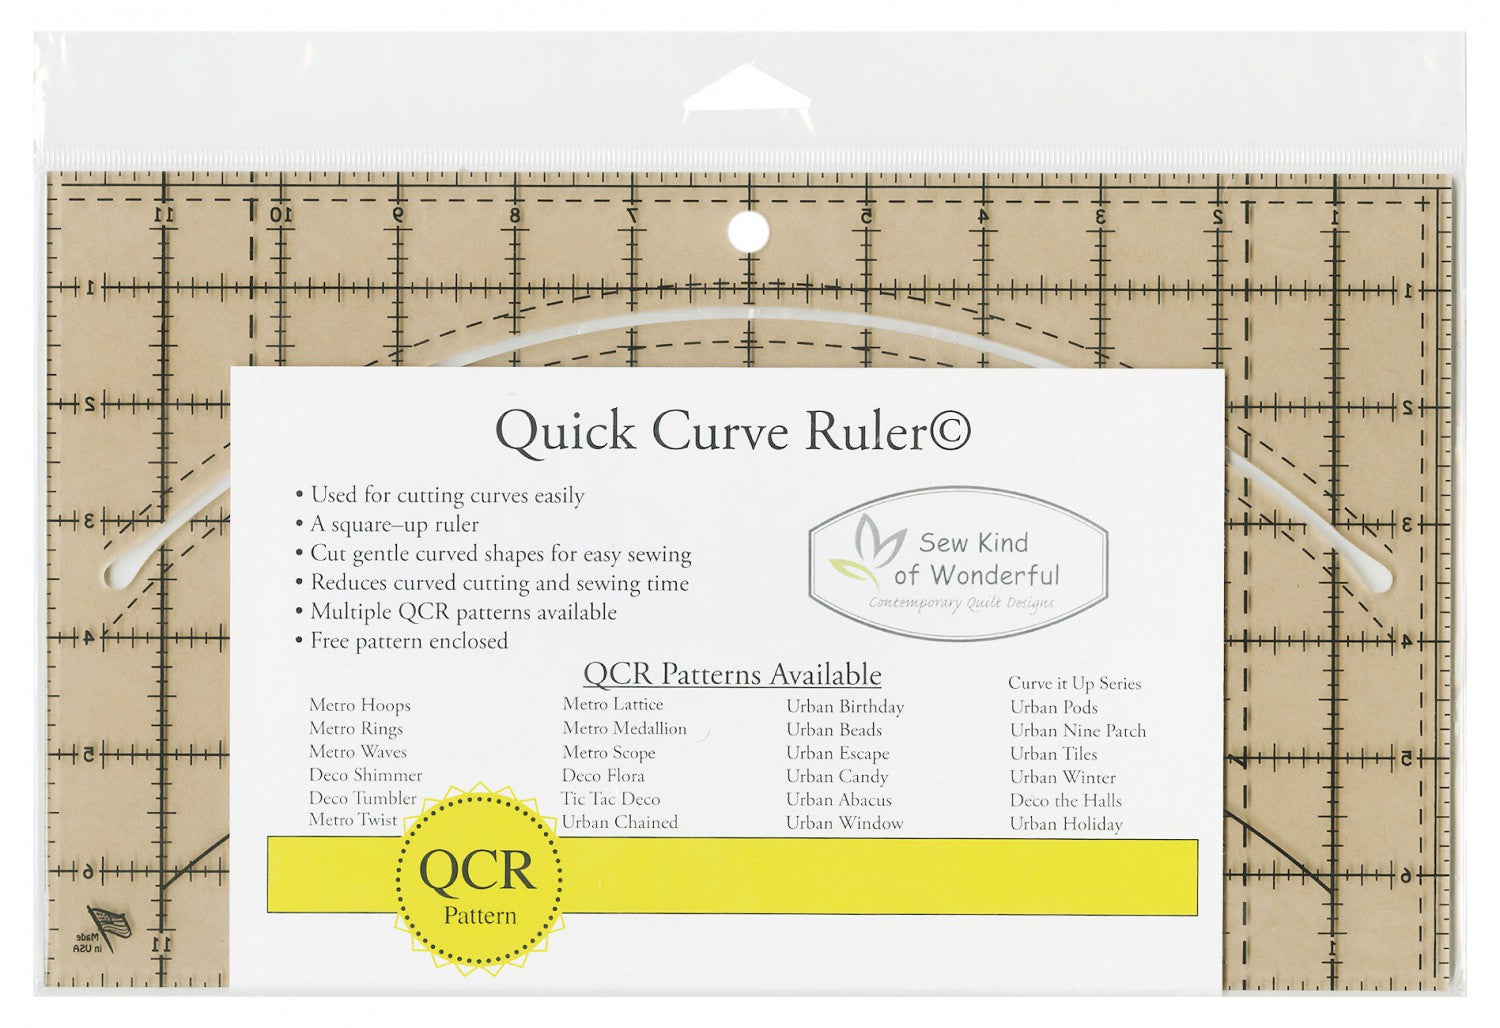 Use for cutting curves easily. A square up ruler. Cut gentle curved shapes for easy sewing. Reduces curved cutting and sewing time. Free pattern enclosed.